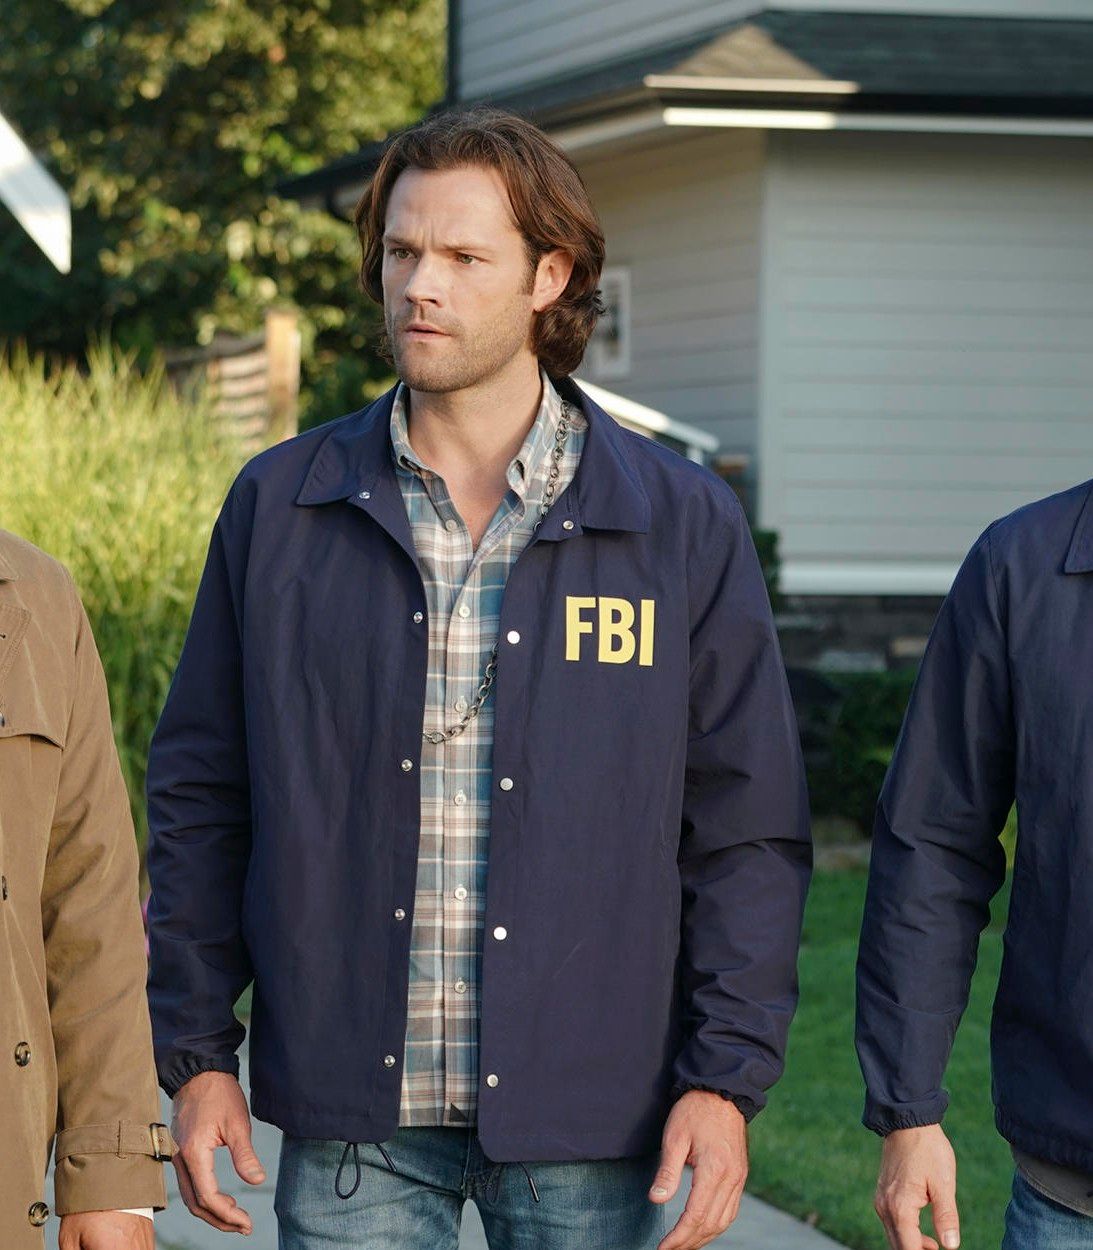 Misha Collins as Castiel, Jared Padakecki as Sam Winchester and Jensen Ackles as Dean in Supernatural vertical